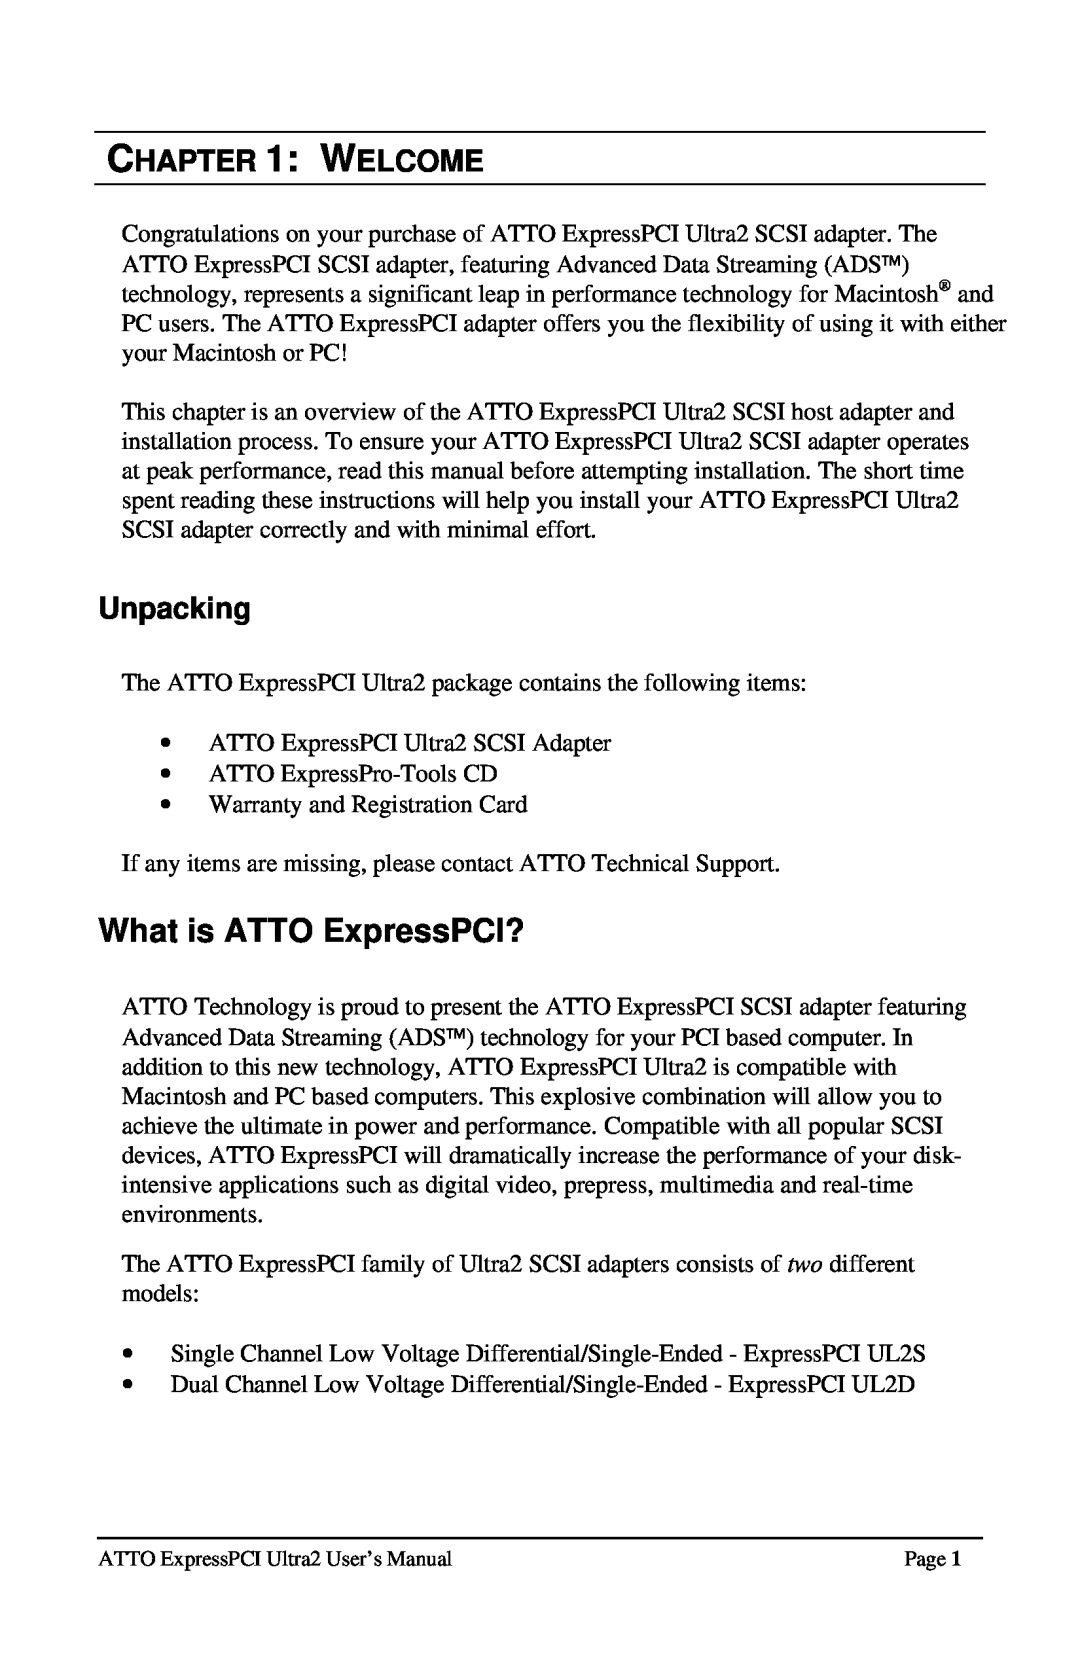 ATTO Technology UL25, UL2D user manual What is ATTO ExpressPCI?, Welcome, Unpacking 